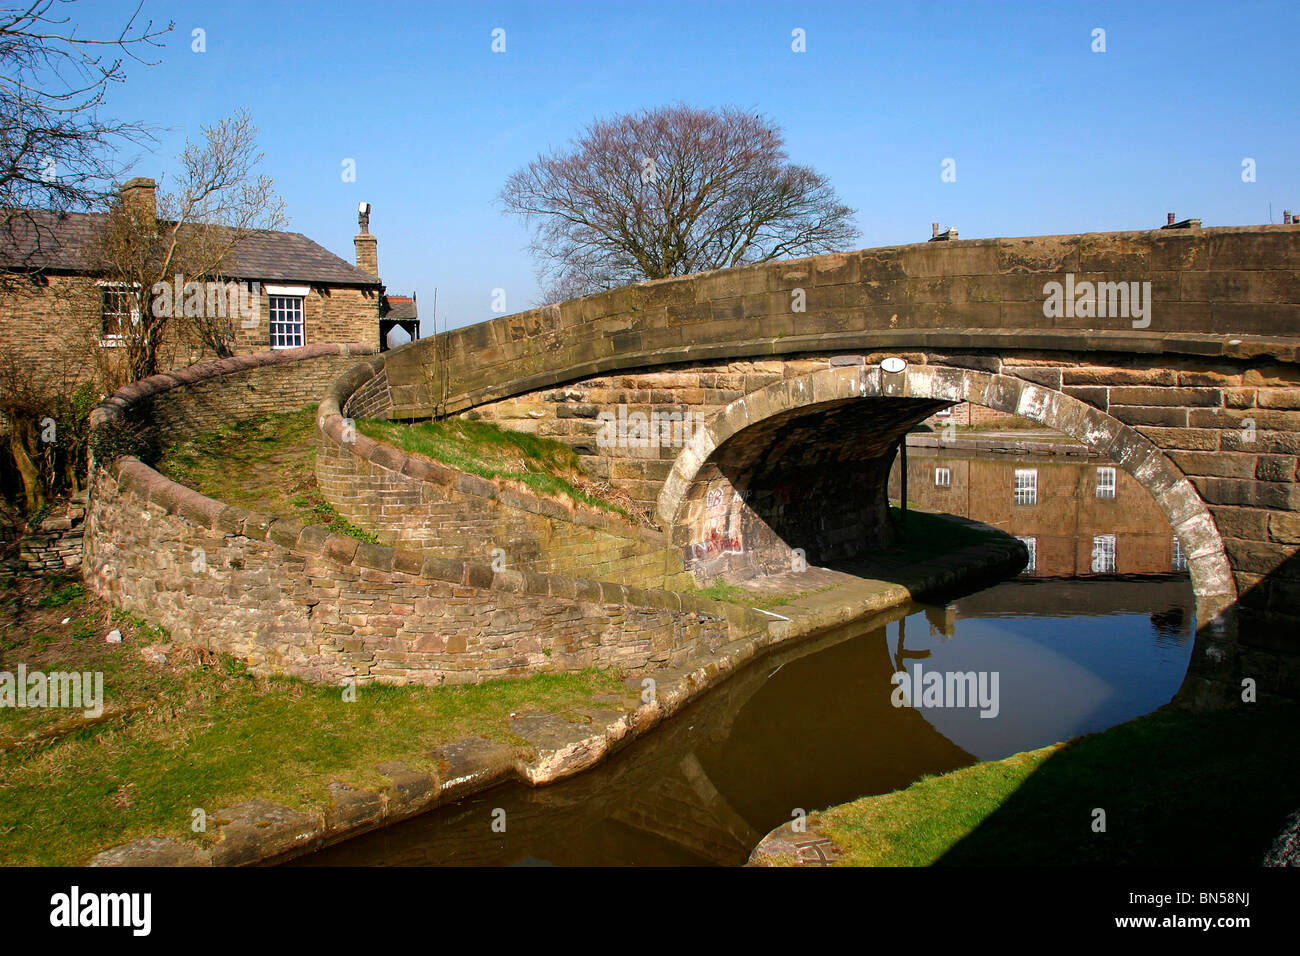 UK, England, Cheshire, Stockport, Marple, circular bridge at junction of Macclesfield and Peak Forest Canals Stock Photo